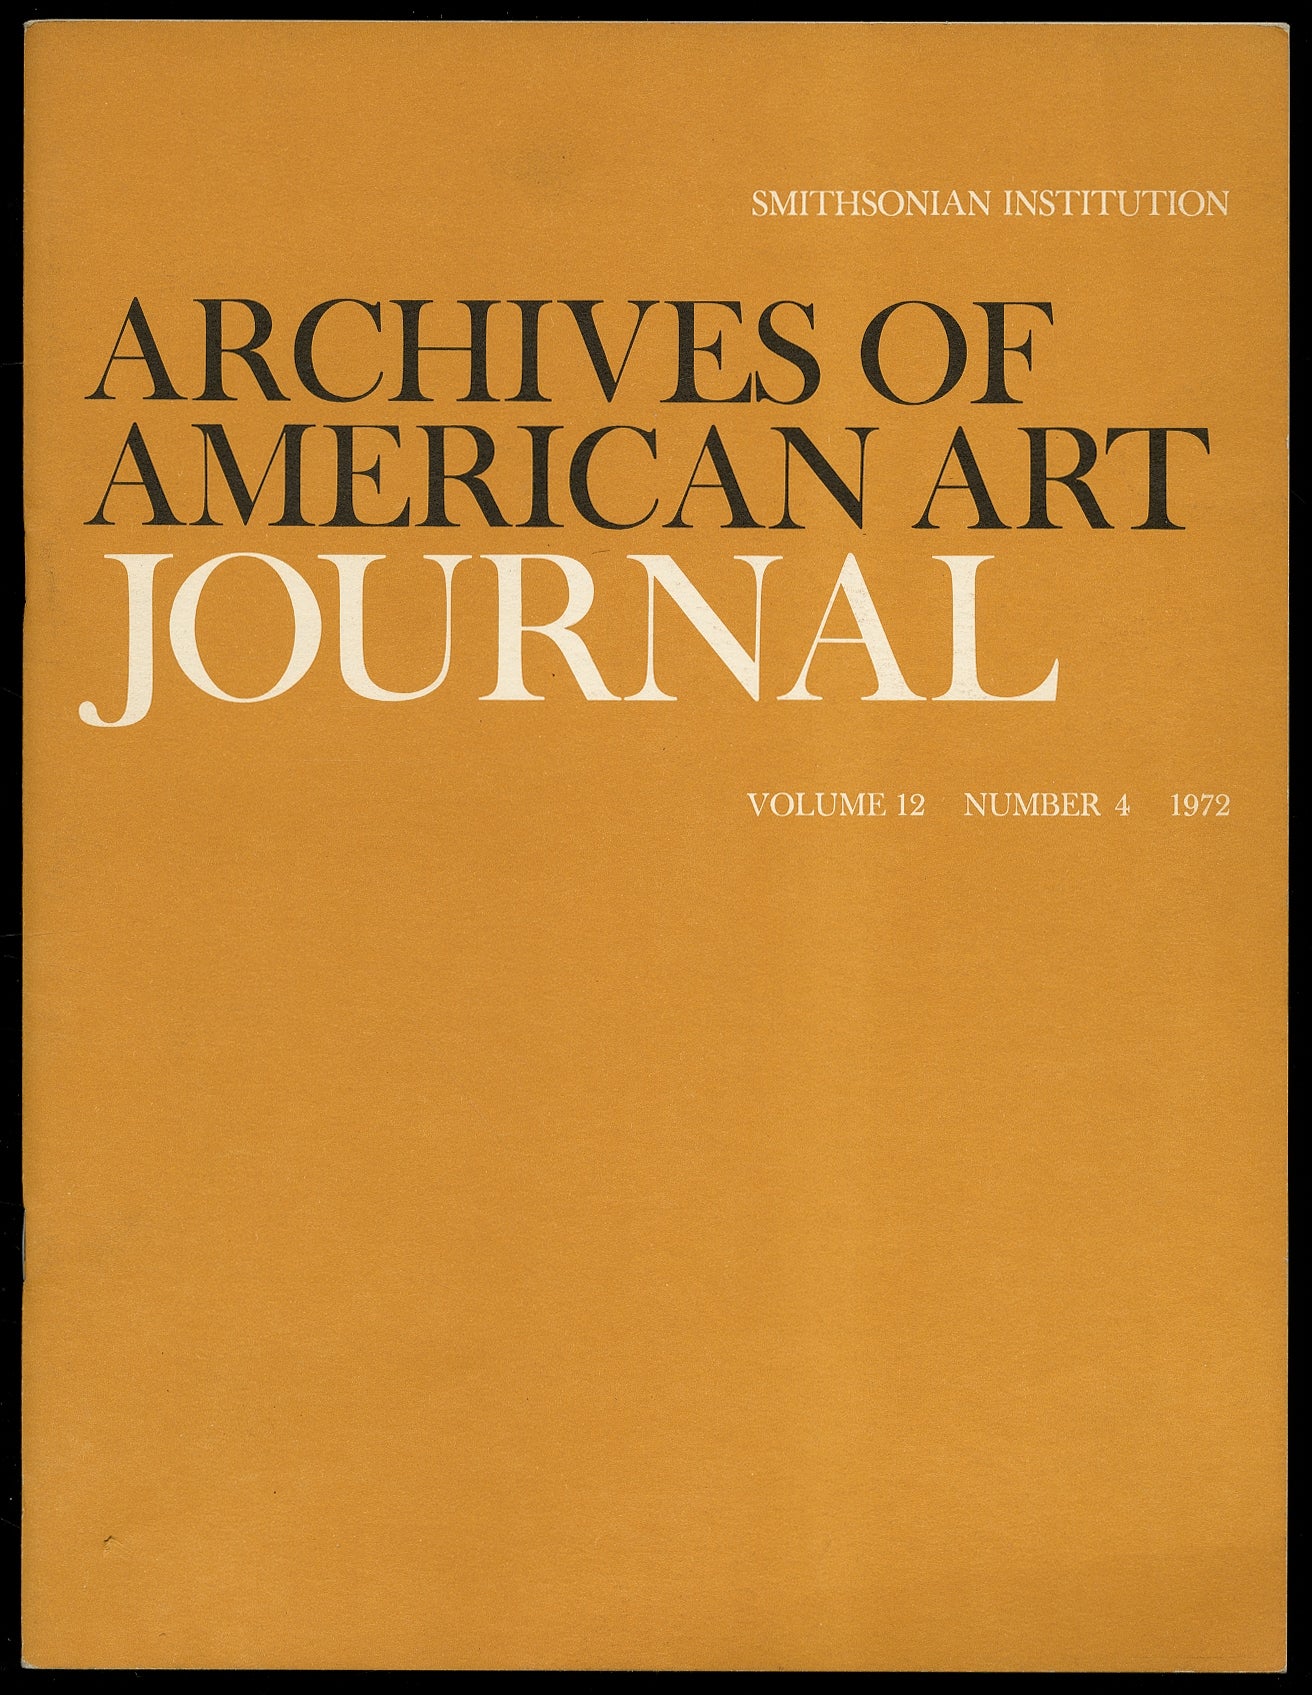 Journal  Archives of American Art, Smithsonian Institution